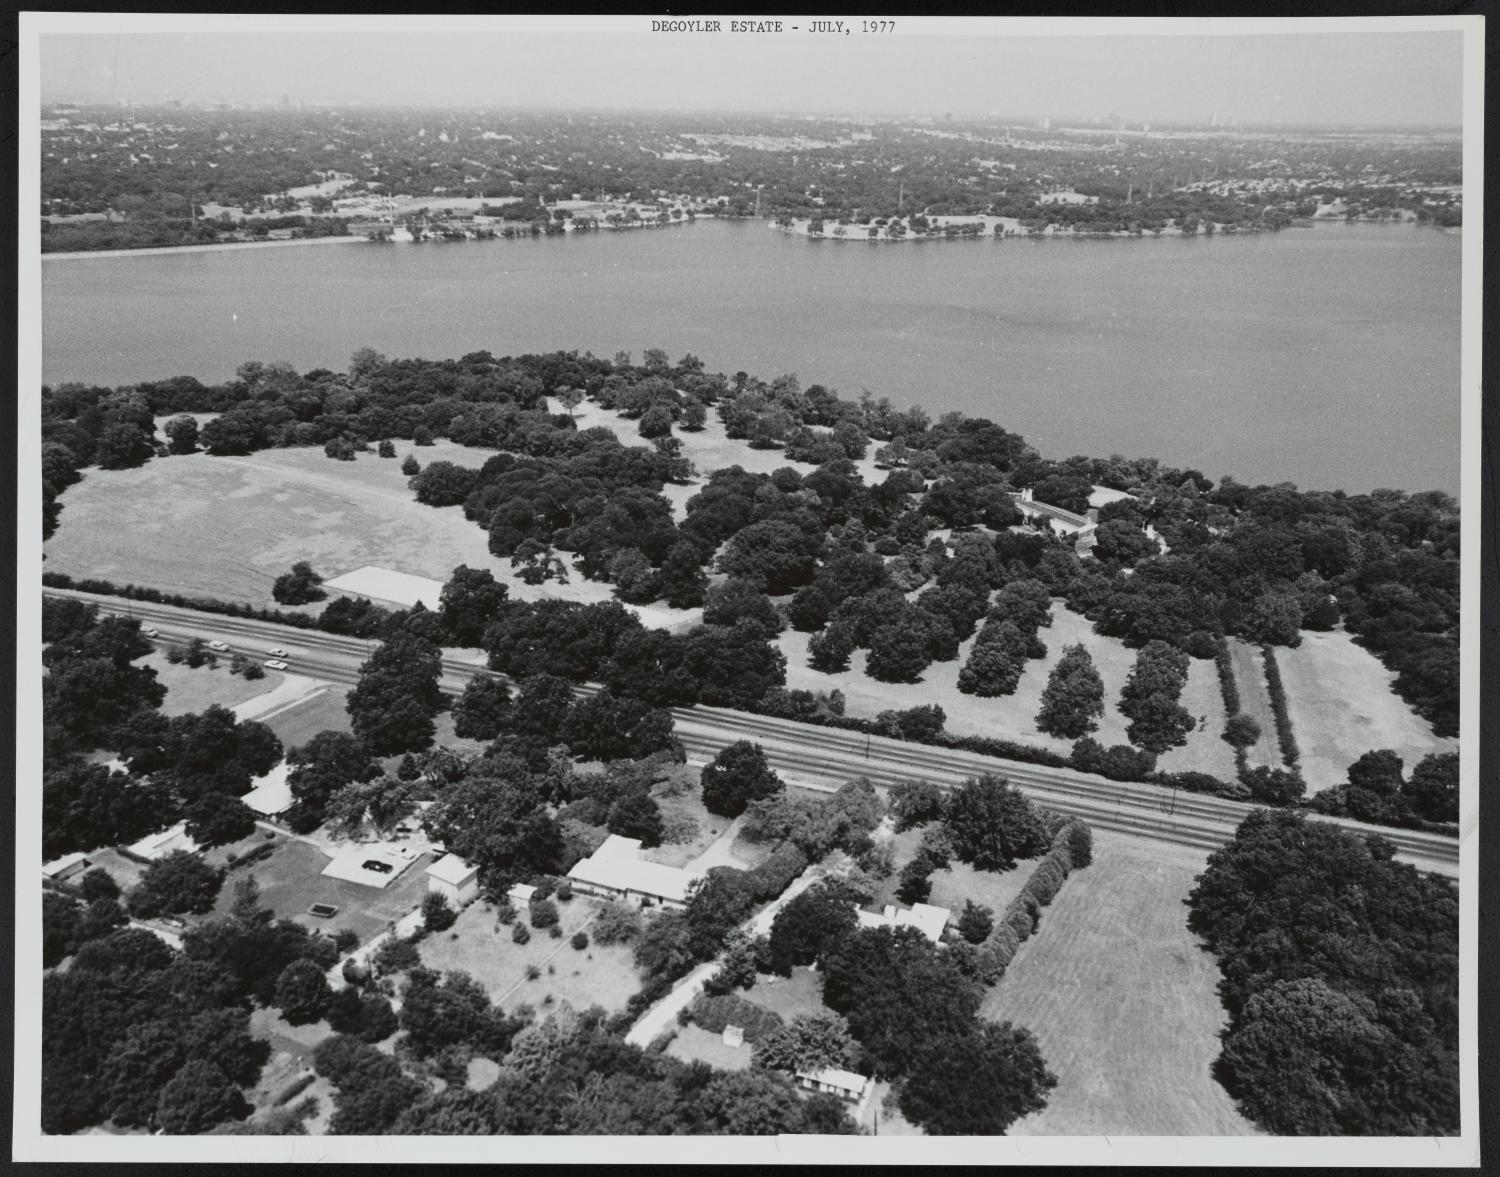 [Aerial View of DeGoyler Estate and Surrounding Area], Photograph of DeGoyler Estate and its surrounding area in Dallas, Texas. The estate, which is partially covered in trees, sits below White Rock Creek and above Garland Road. Approximately five small buildings are visible on the other side of Garland Road., 